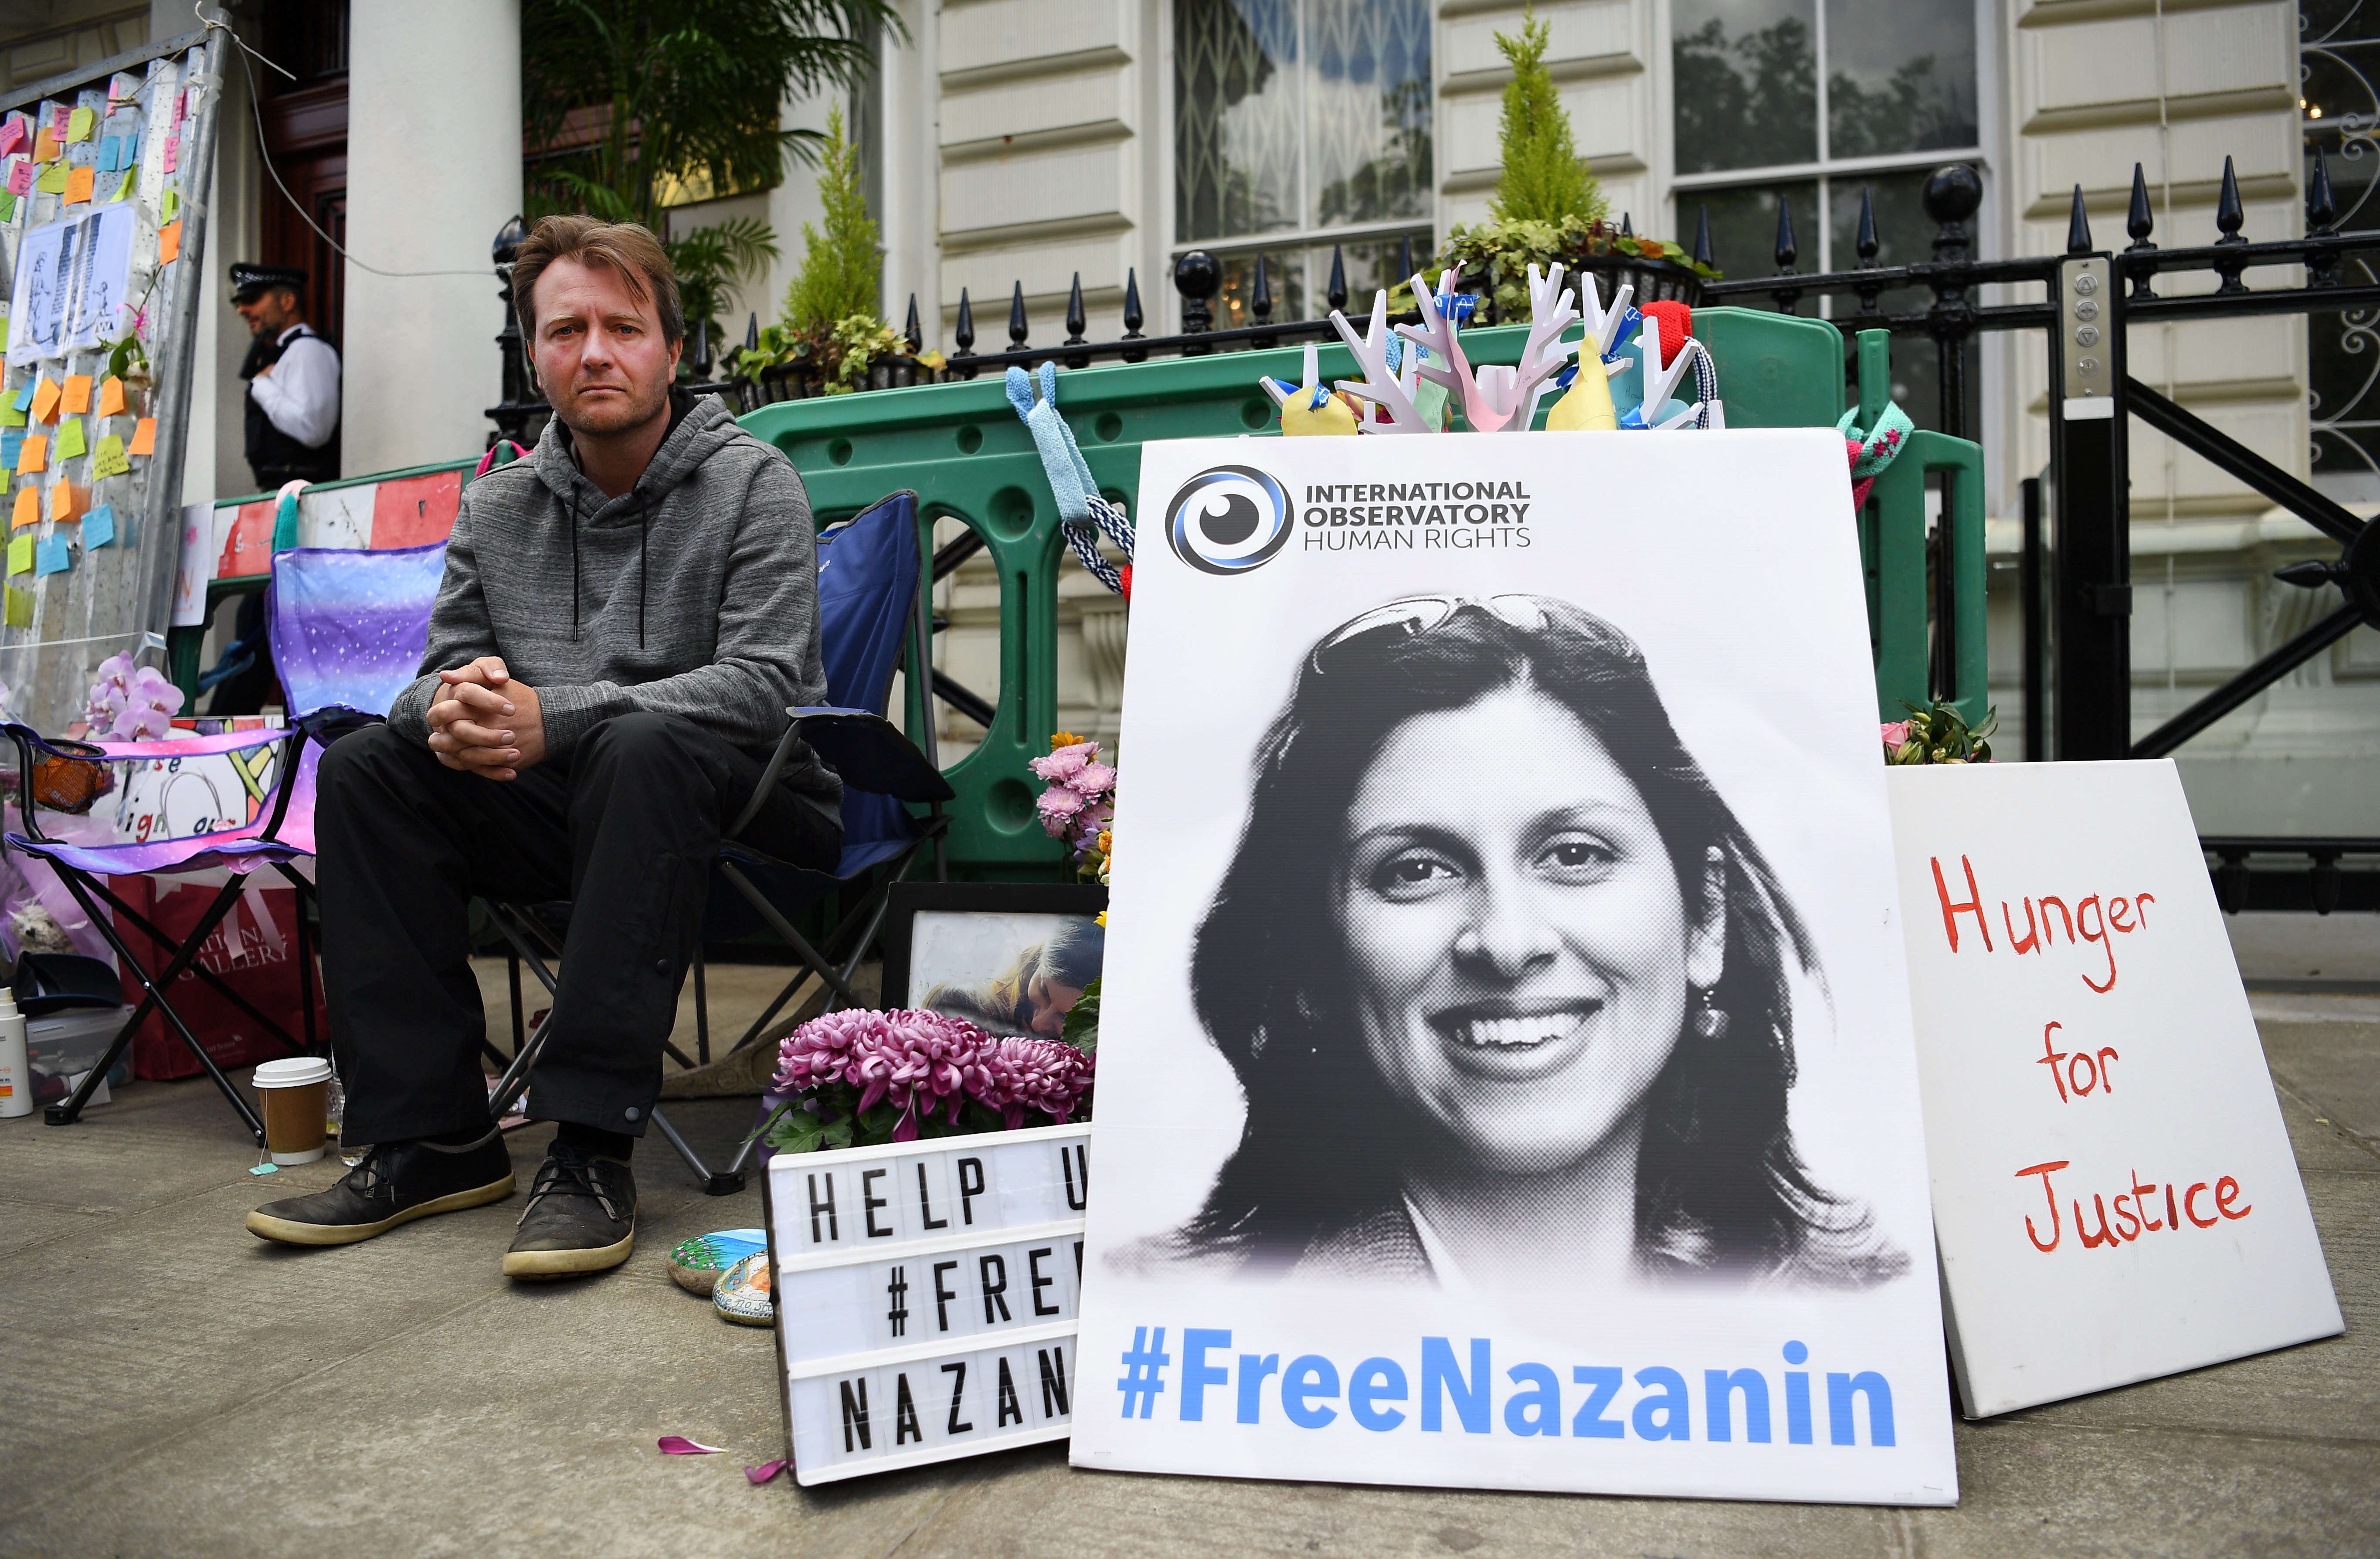 epa07663382 Richard Ratcliffe, the husband of imprisoned Nazanin Zaghari-Ratcliffe, outside the Iranian Embassy in London, Britain, 21 June 2019. Nazanin Zaghari-Ratcliffe has begun a new hunger strike in the Iranian jail. Zaghari-Ratcliffe was jailed for five years in Iran in 2016 after being convicted of spying, which she denies. Mr Ratcliffe is continuing his hunger strike in solidarity with his wife.  EPA/ANDY RAIN